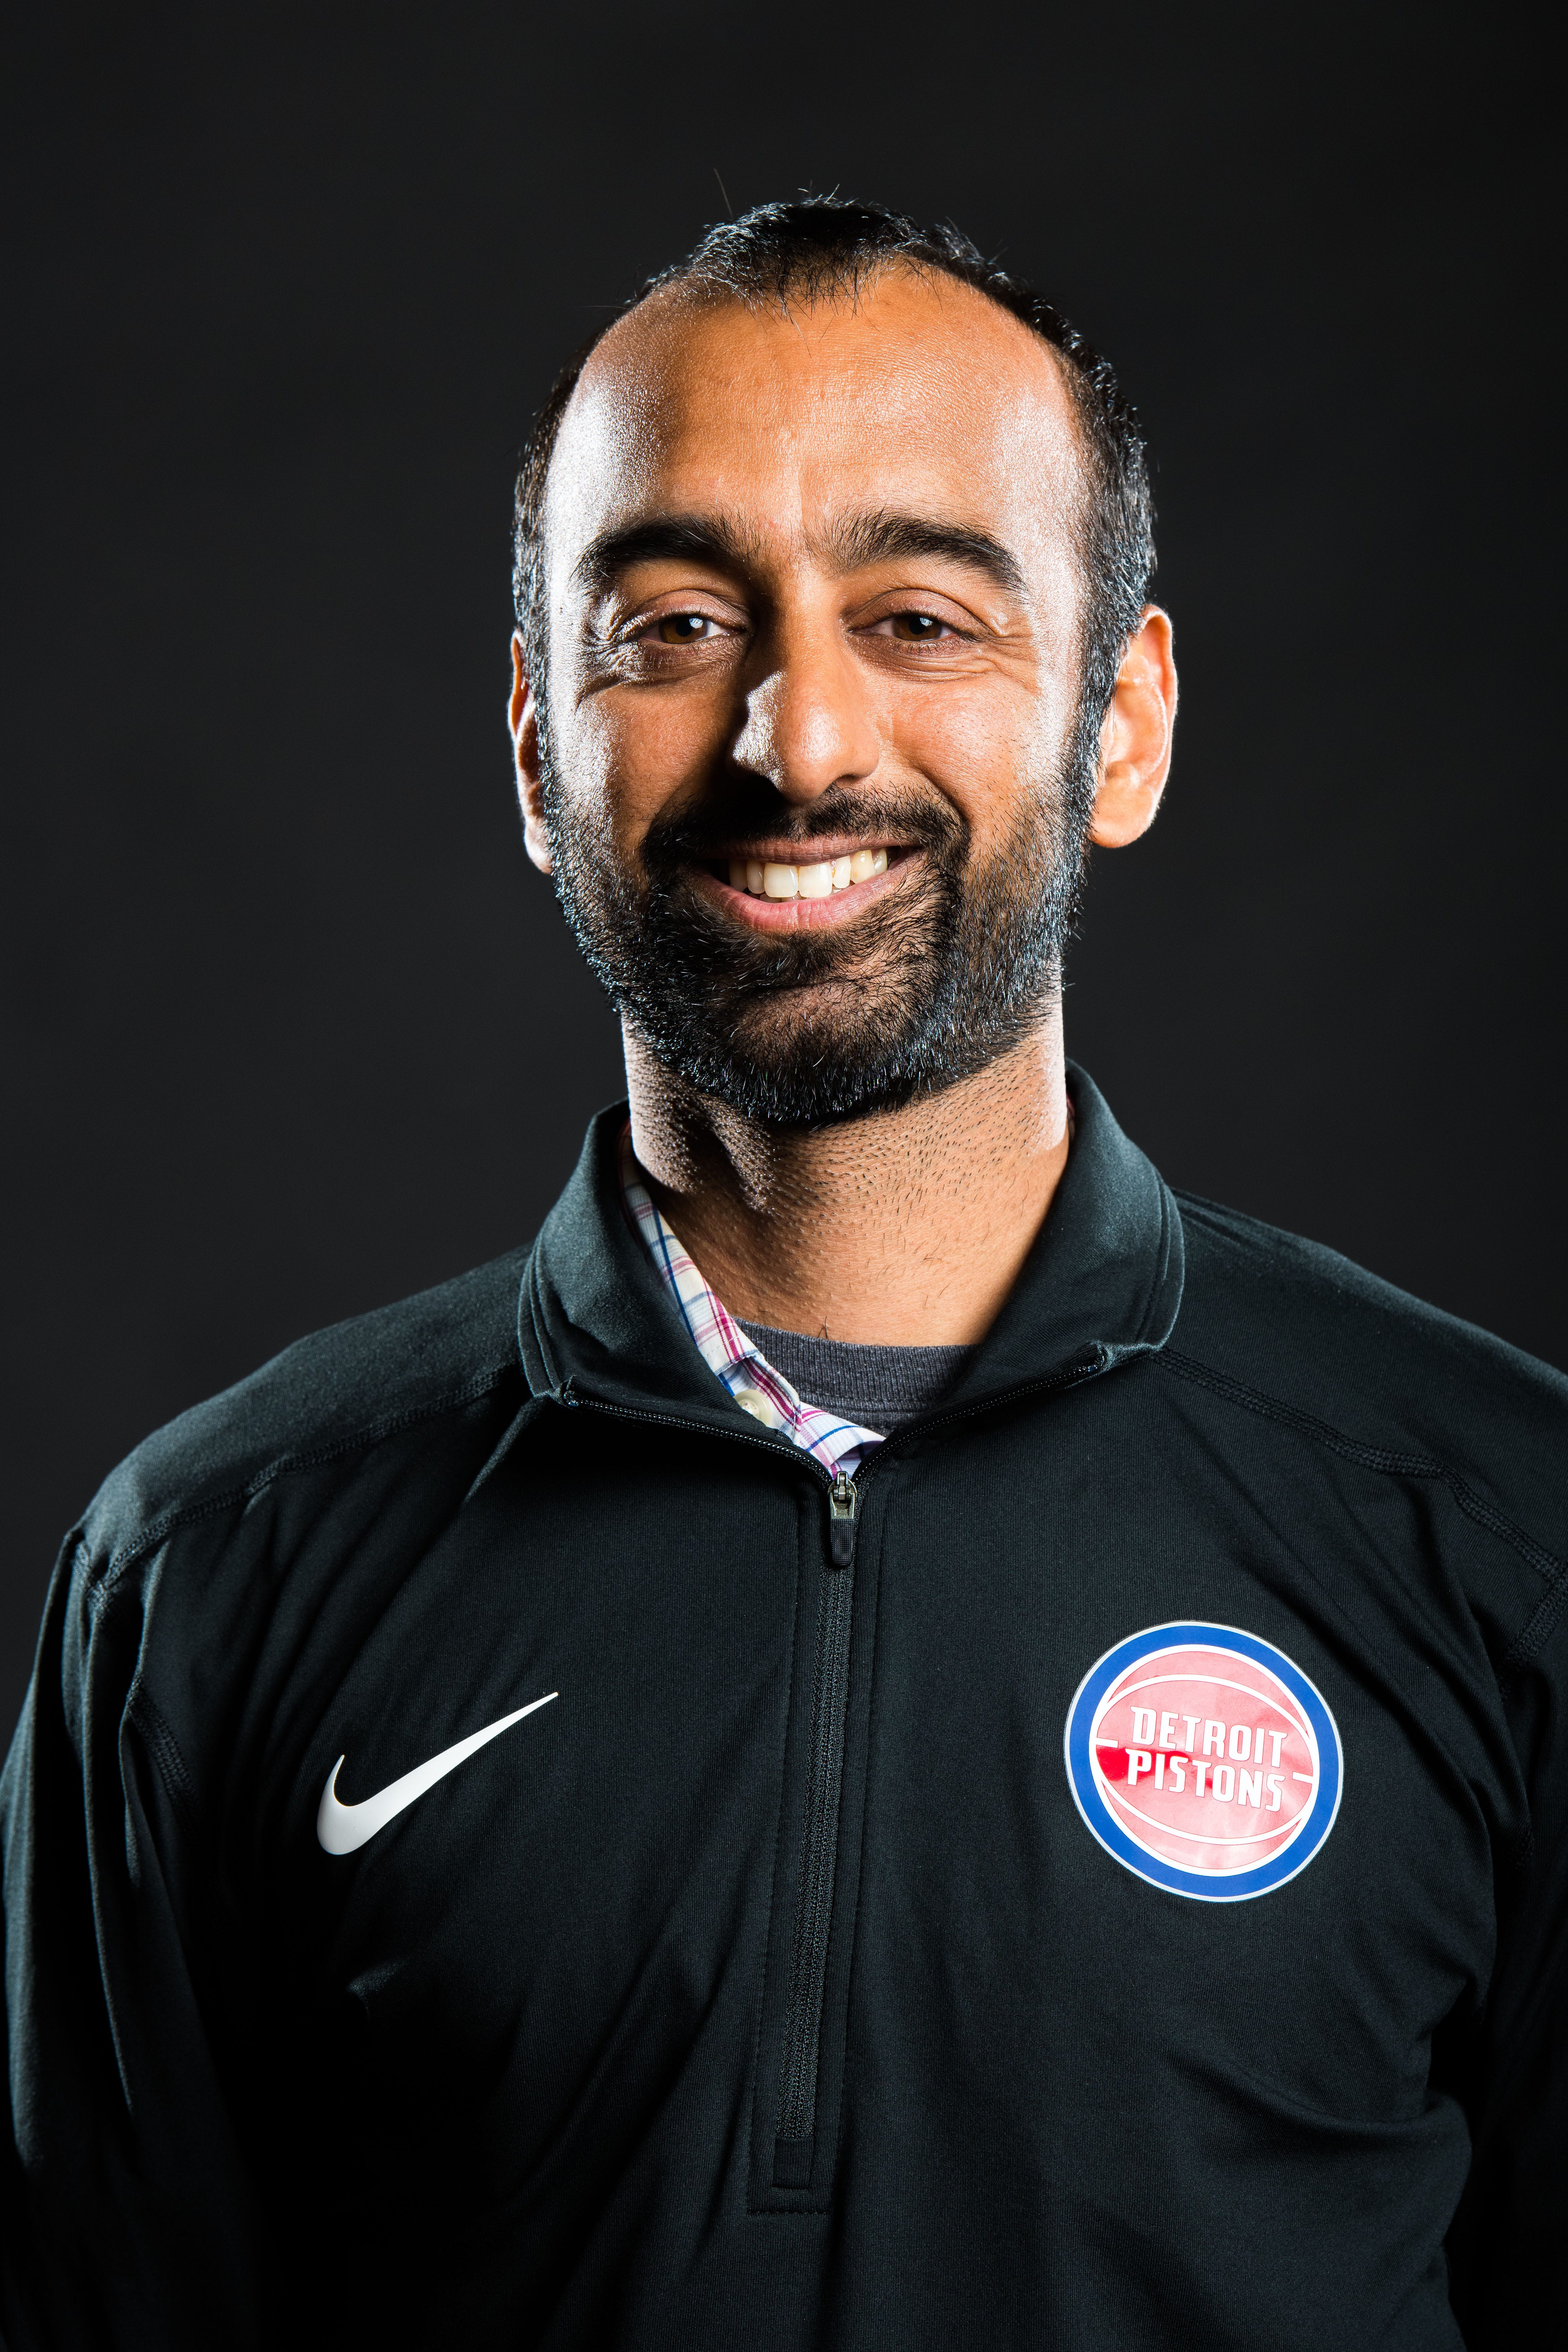 Pistons assistant GM Sachin Gupta has a bachelor’s degree in Computer Science and Electrical Engineering from MIT.